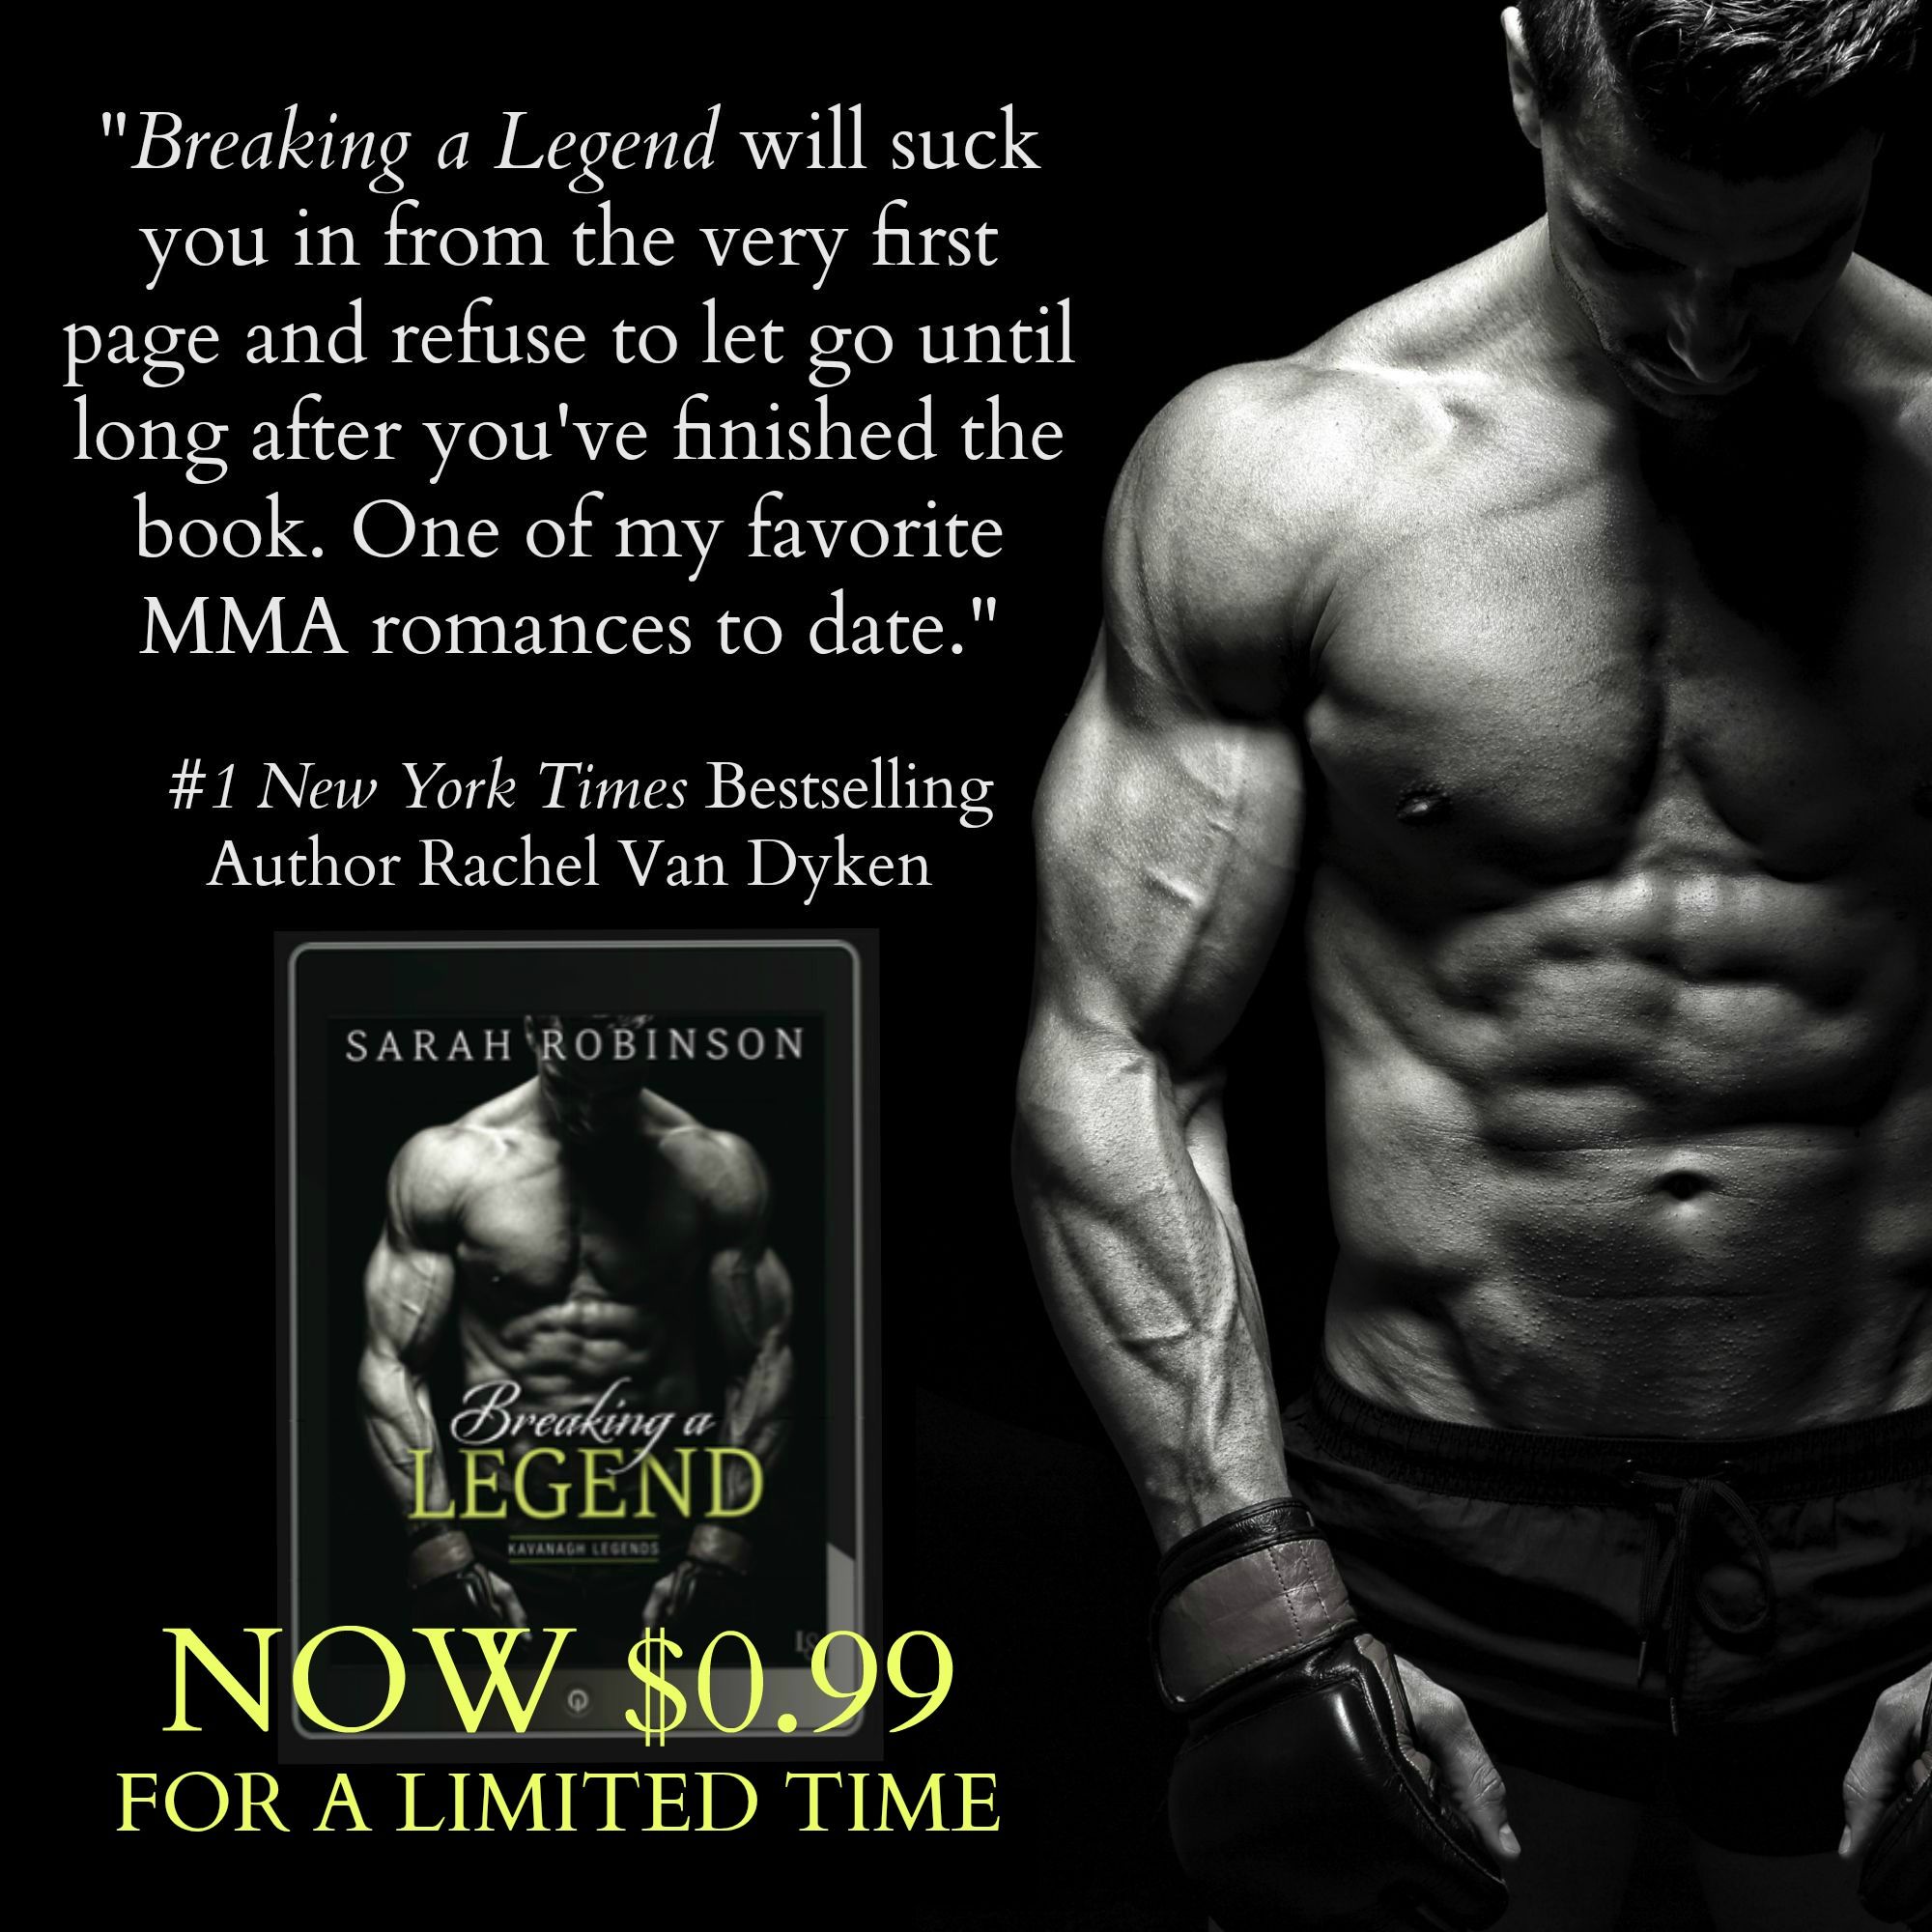 Breaking A Legend is on sale for .99 and watch the new trailer and enter to win